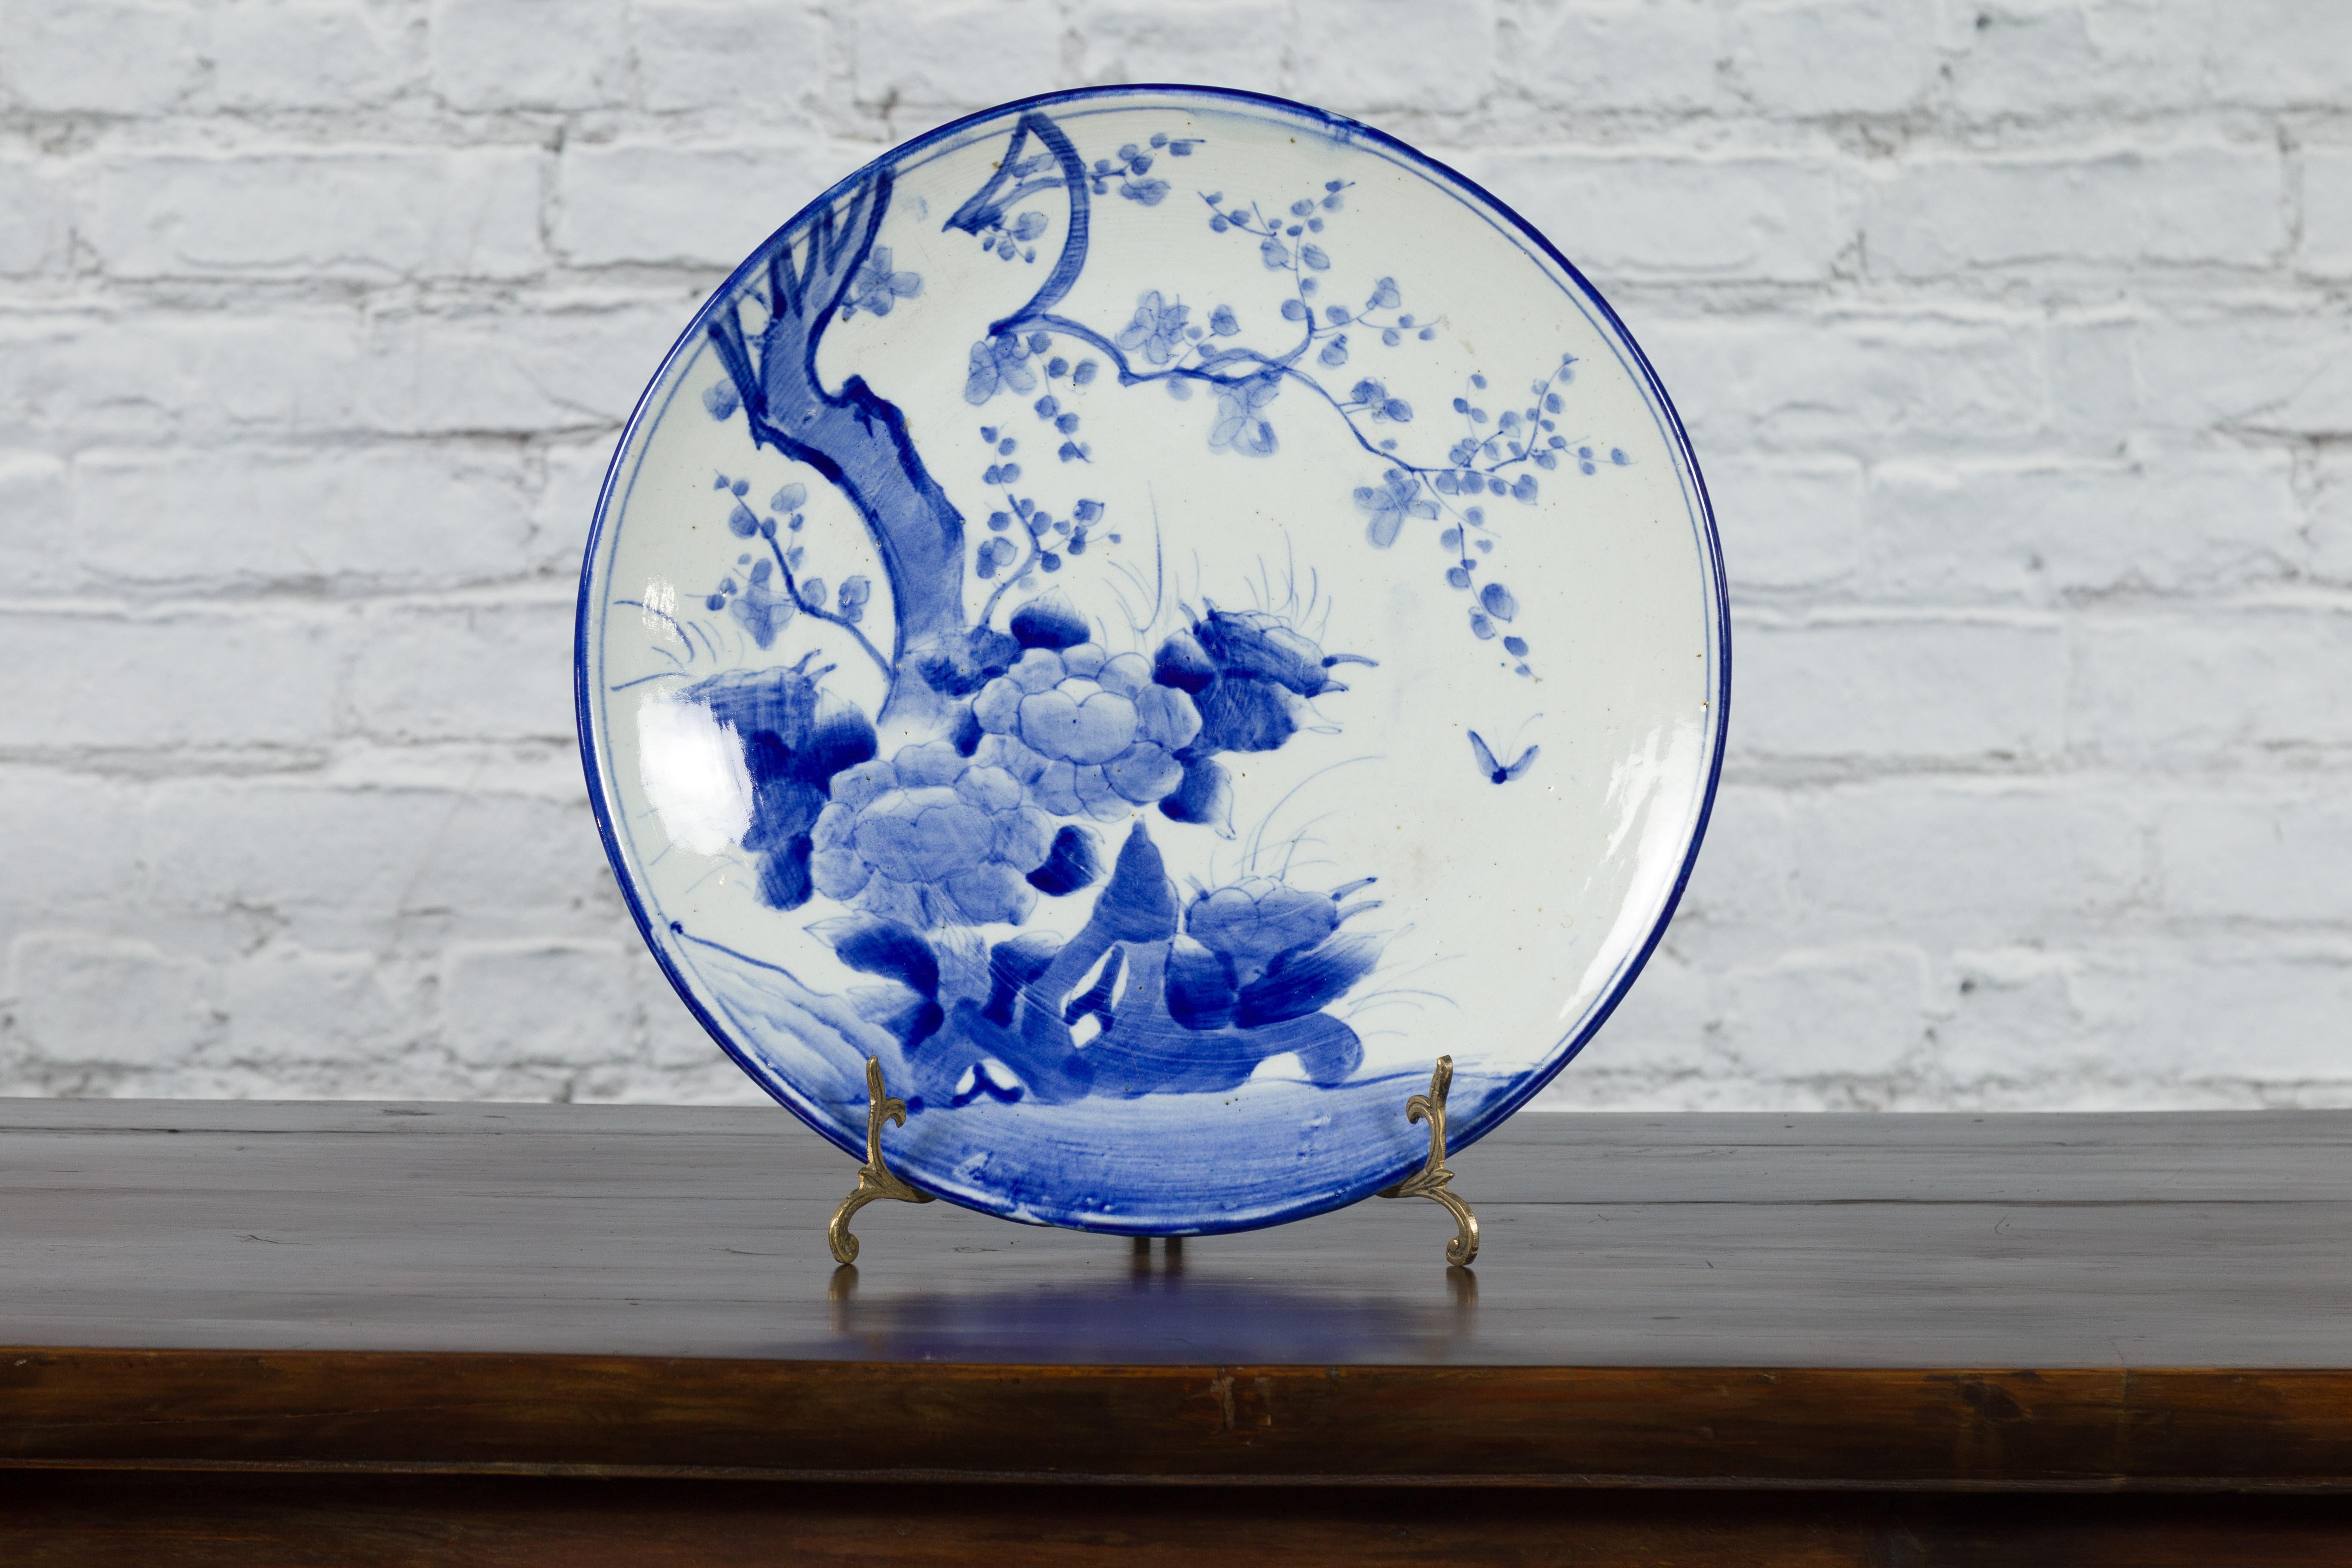 A Japanese hand-painted porcelain plate from the 19th century, with blue and white tree, foliage and butterfly décor. Created in Japan during the 19th century, this porcelain plate features a delicate blue and white décor depicting a blooming tree